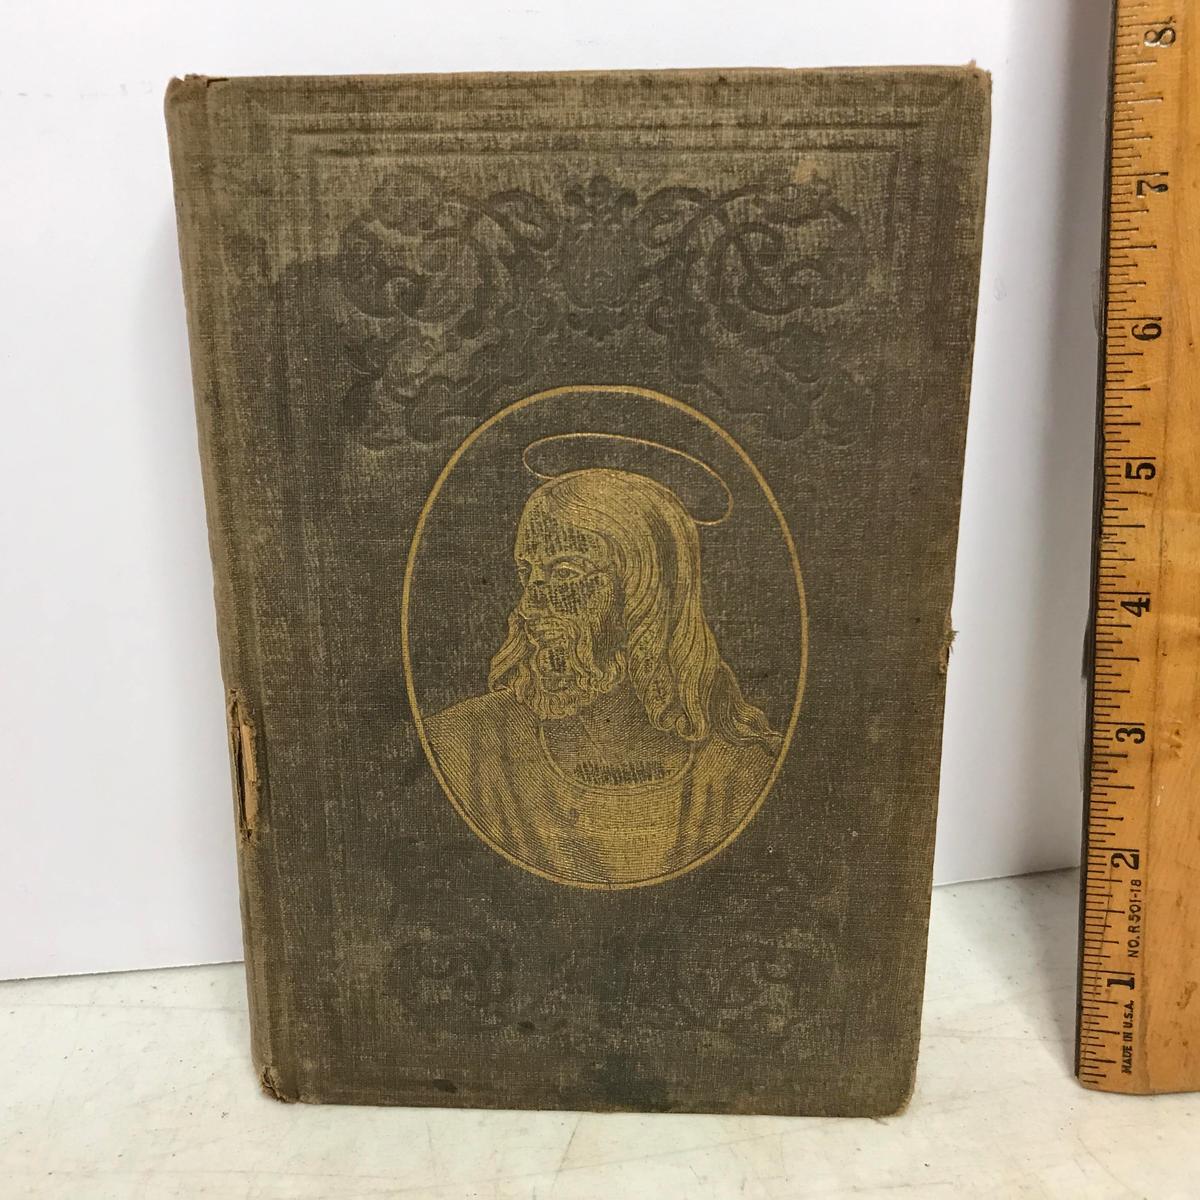 1852 Fleetwood’s Life of Christ and His Apostles” Hard Cover Book